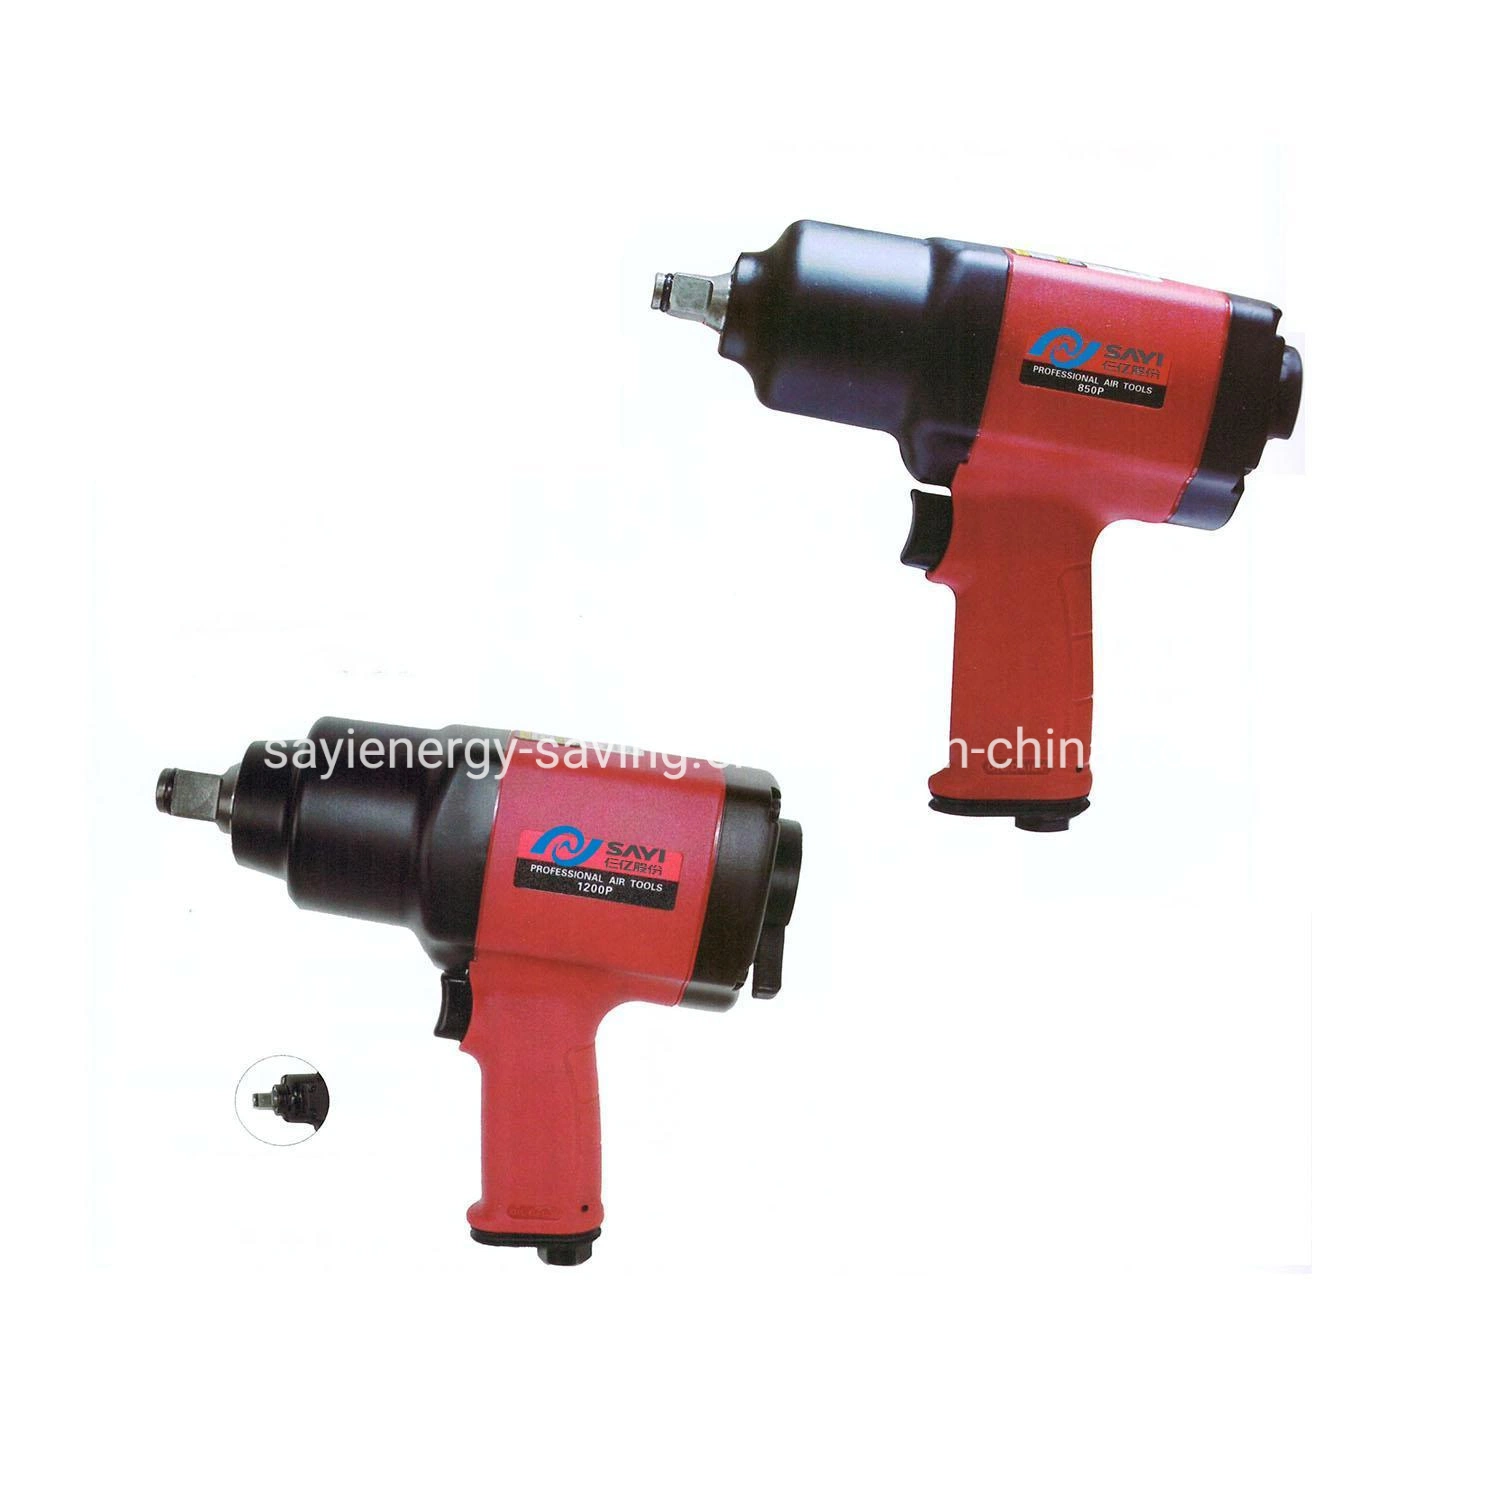 Air Tool Pneumatic Portable Power Handtool Hardware Air Impact Wrench Sy850p 1200p Tools Power Tools Powerful Strength Reliable Durable Pneumatic Tools